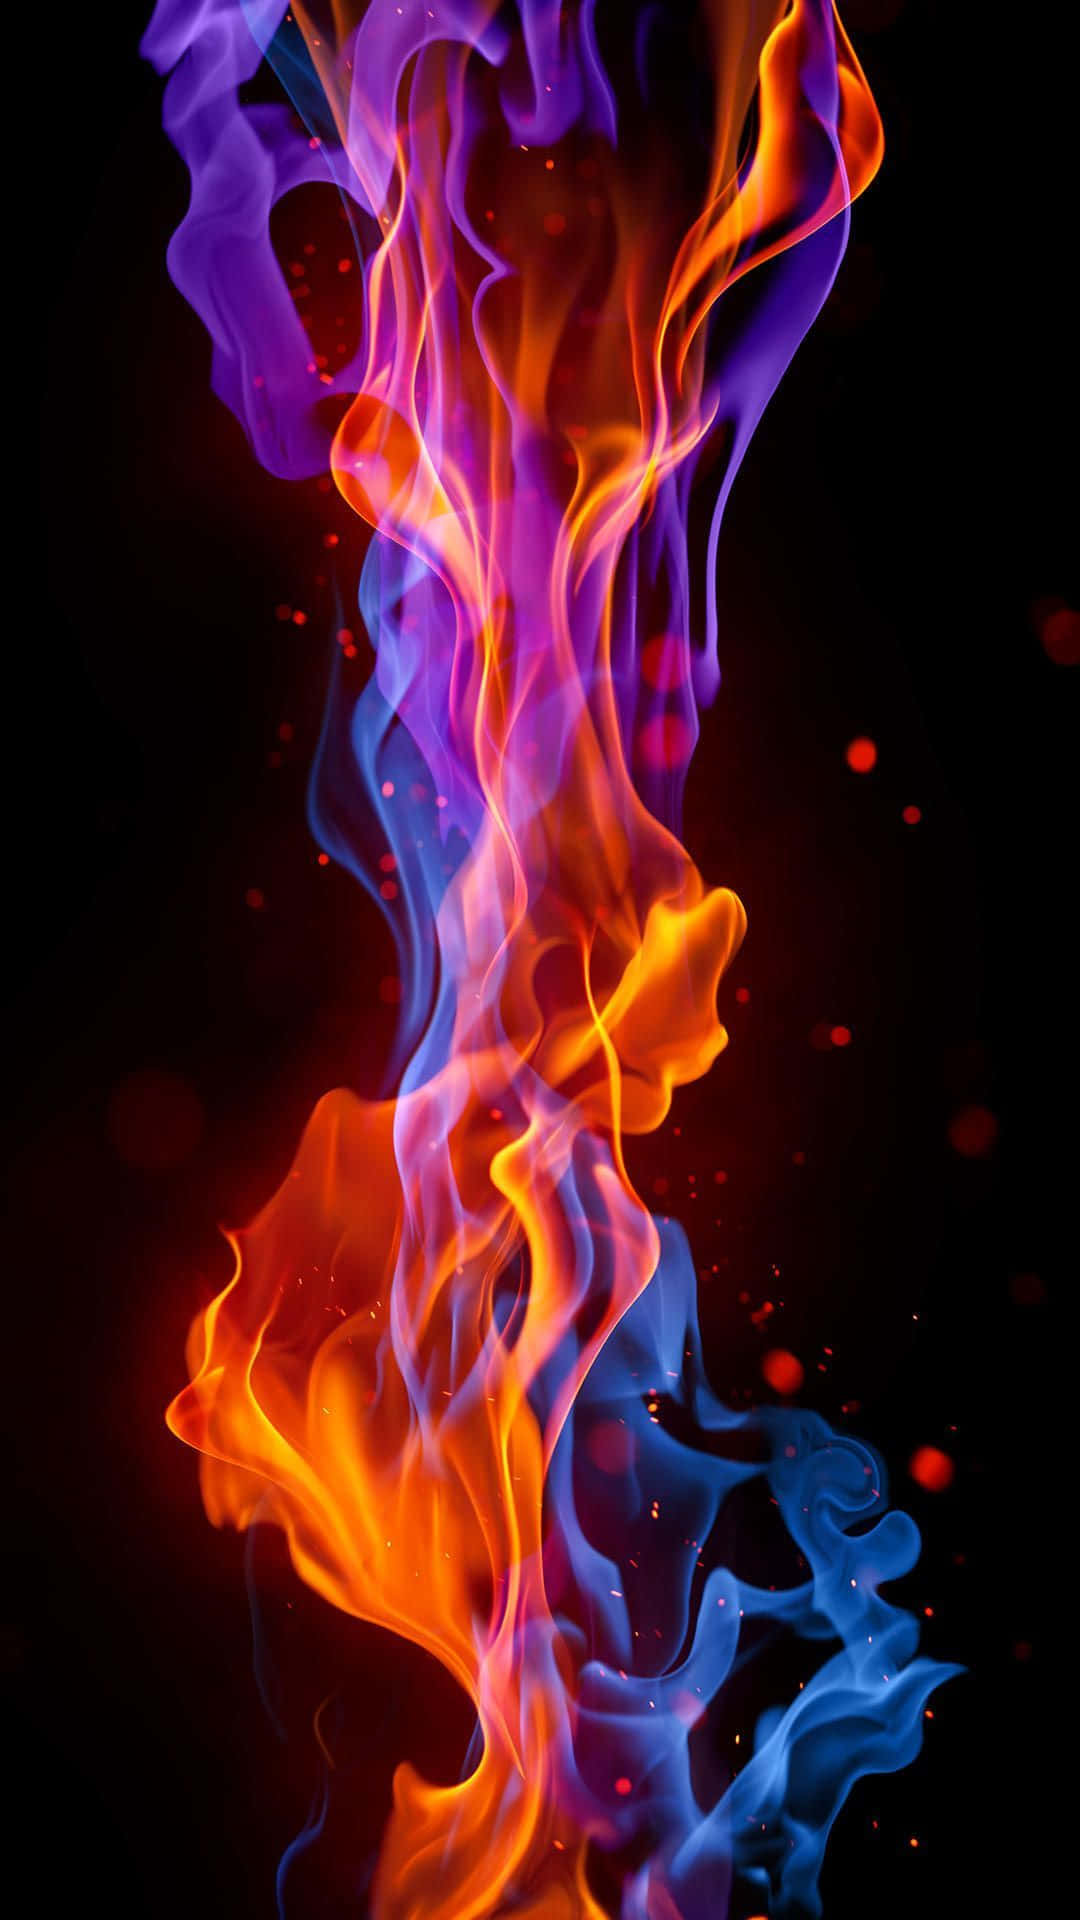 Androidfeuer Flamme Wallpaper